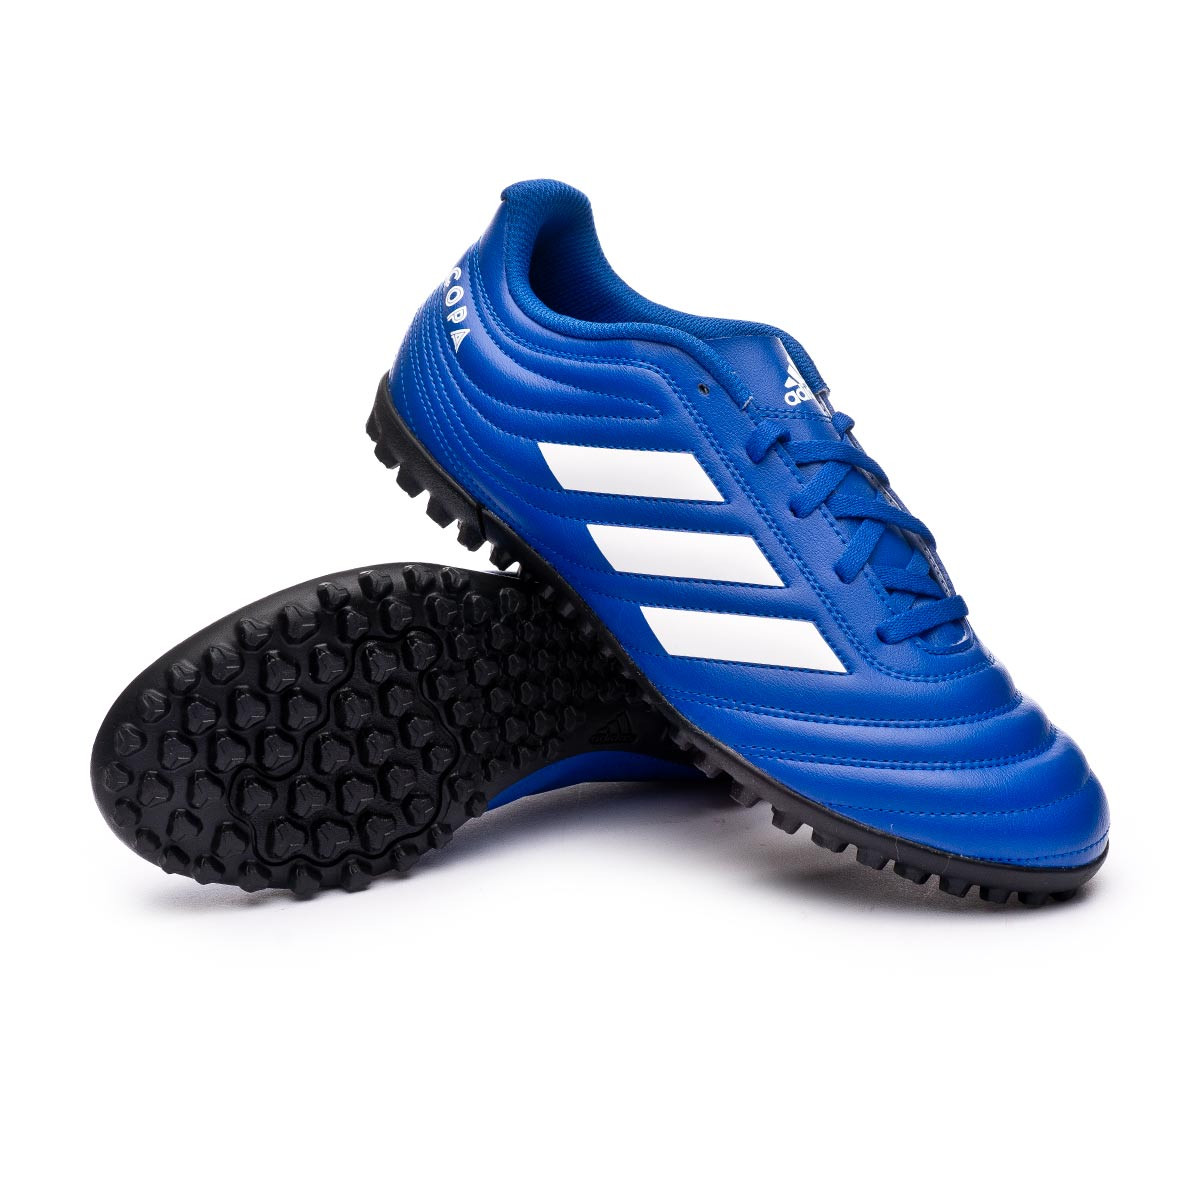 adidas trainers football shoes